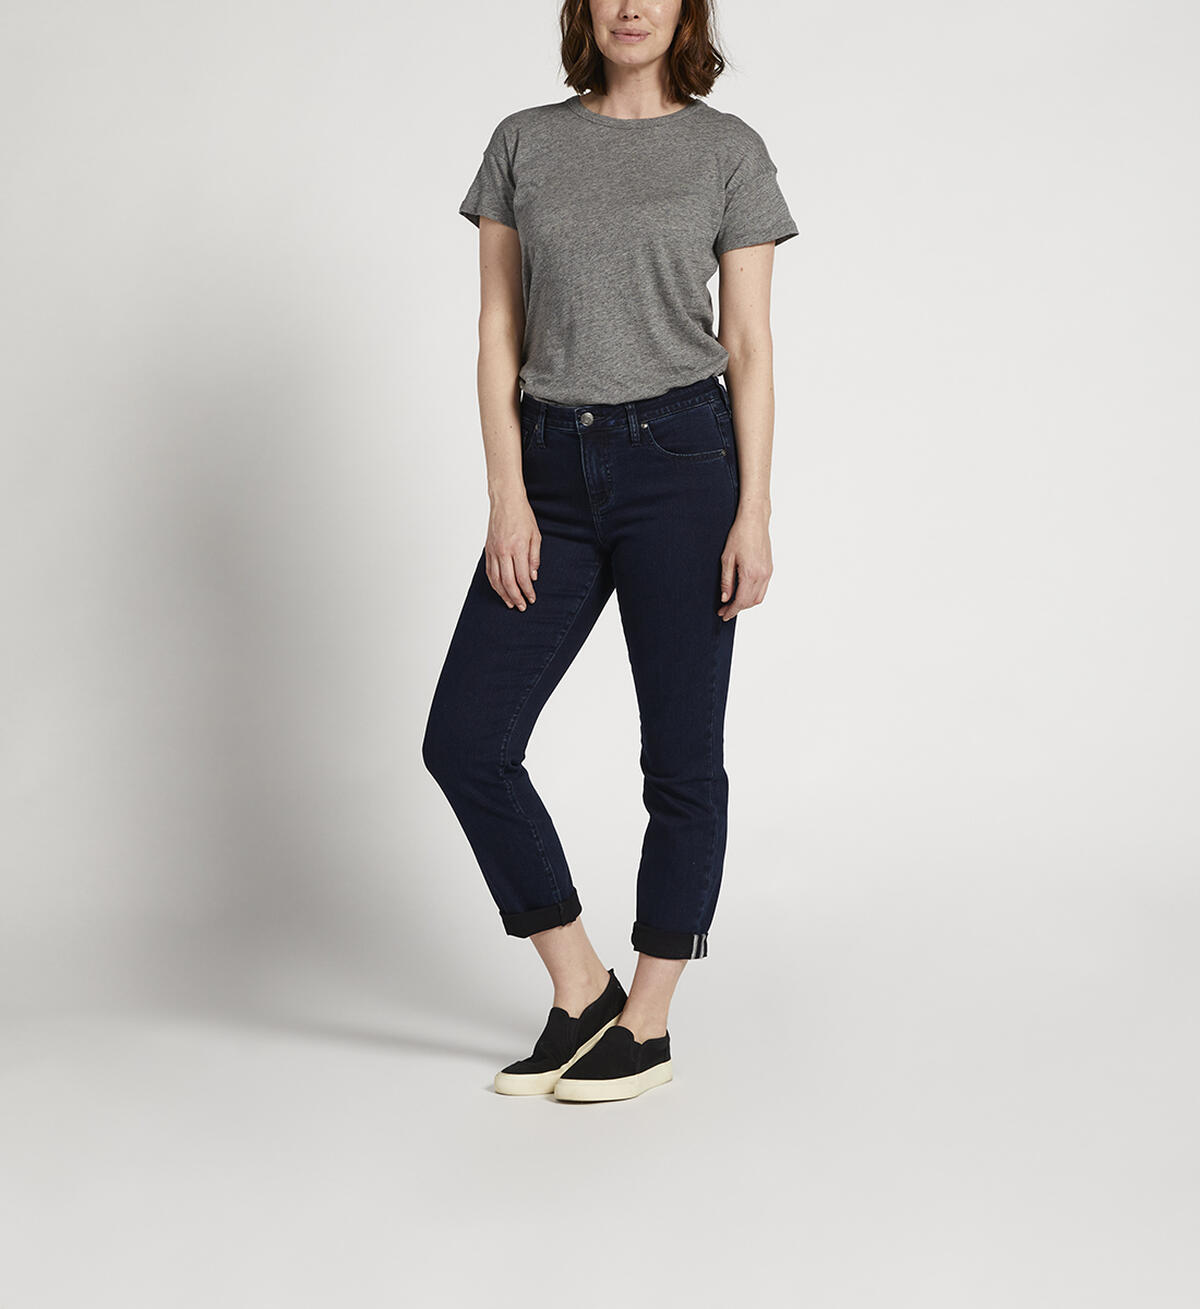 Carter Mid Rise Girlfriend Jeans Petite, , hi-res image number 0